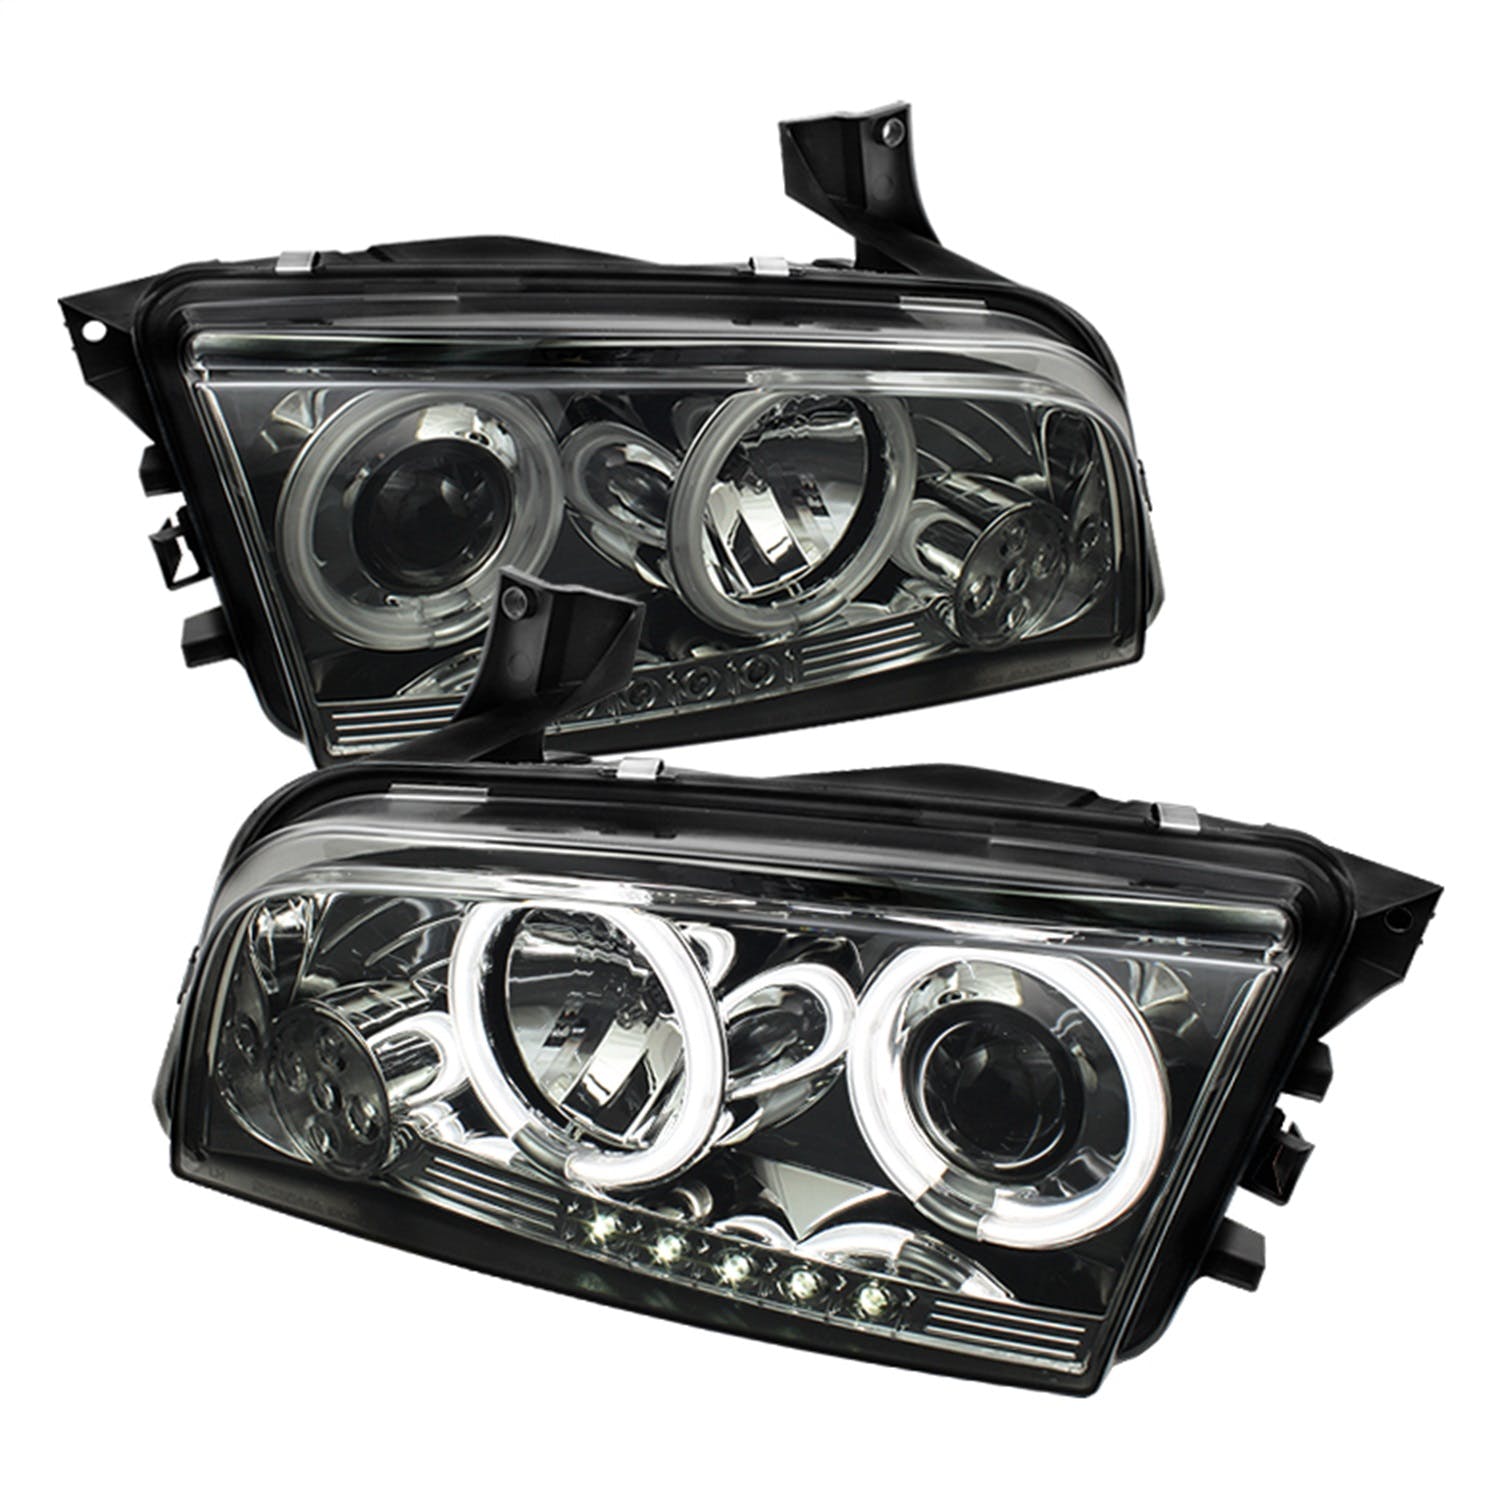 Spyder Auto 5039262 (Spyder) Dodge Charger 06-10 Projector Headlights-Halogen Model Only ( Not Compa